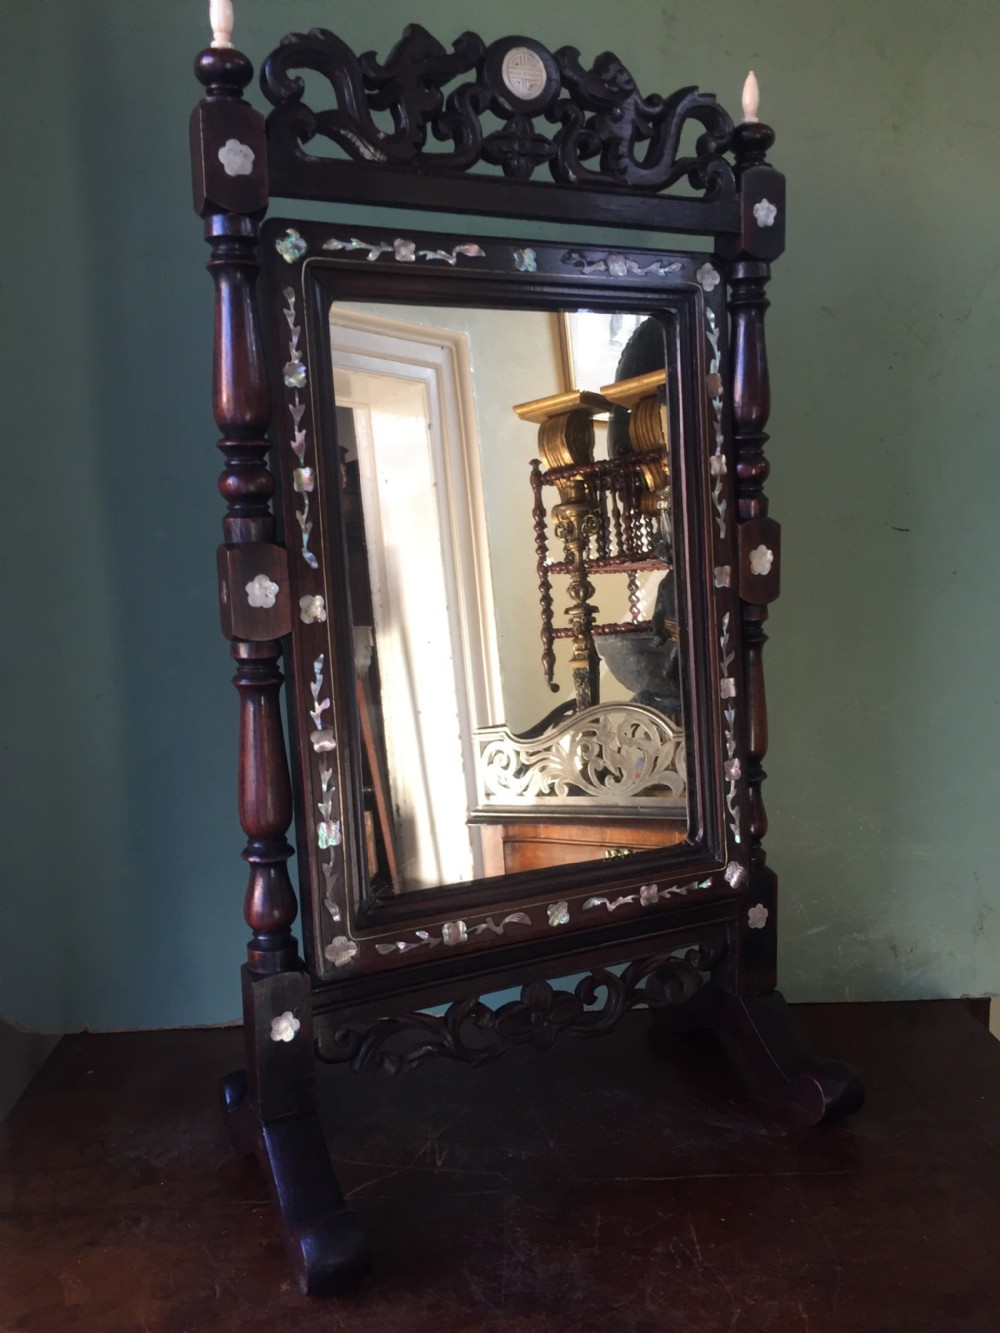 interesting mid c19th chinese miniature hardwoodframed vanity mirror with 'mother of pearl' inlay and ivory finials